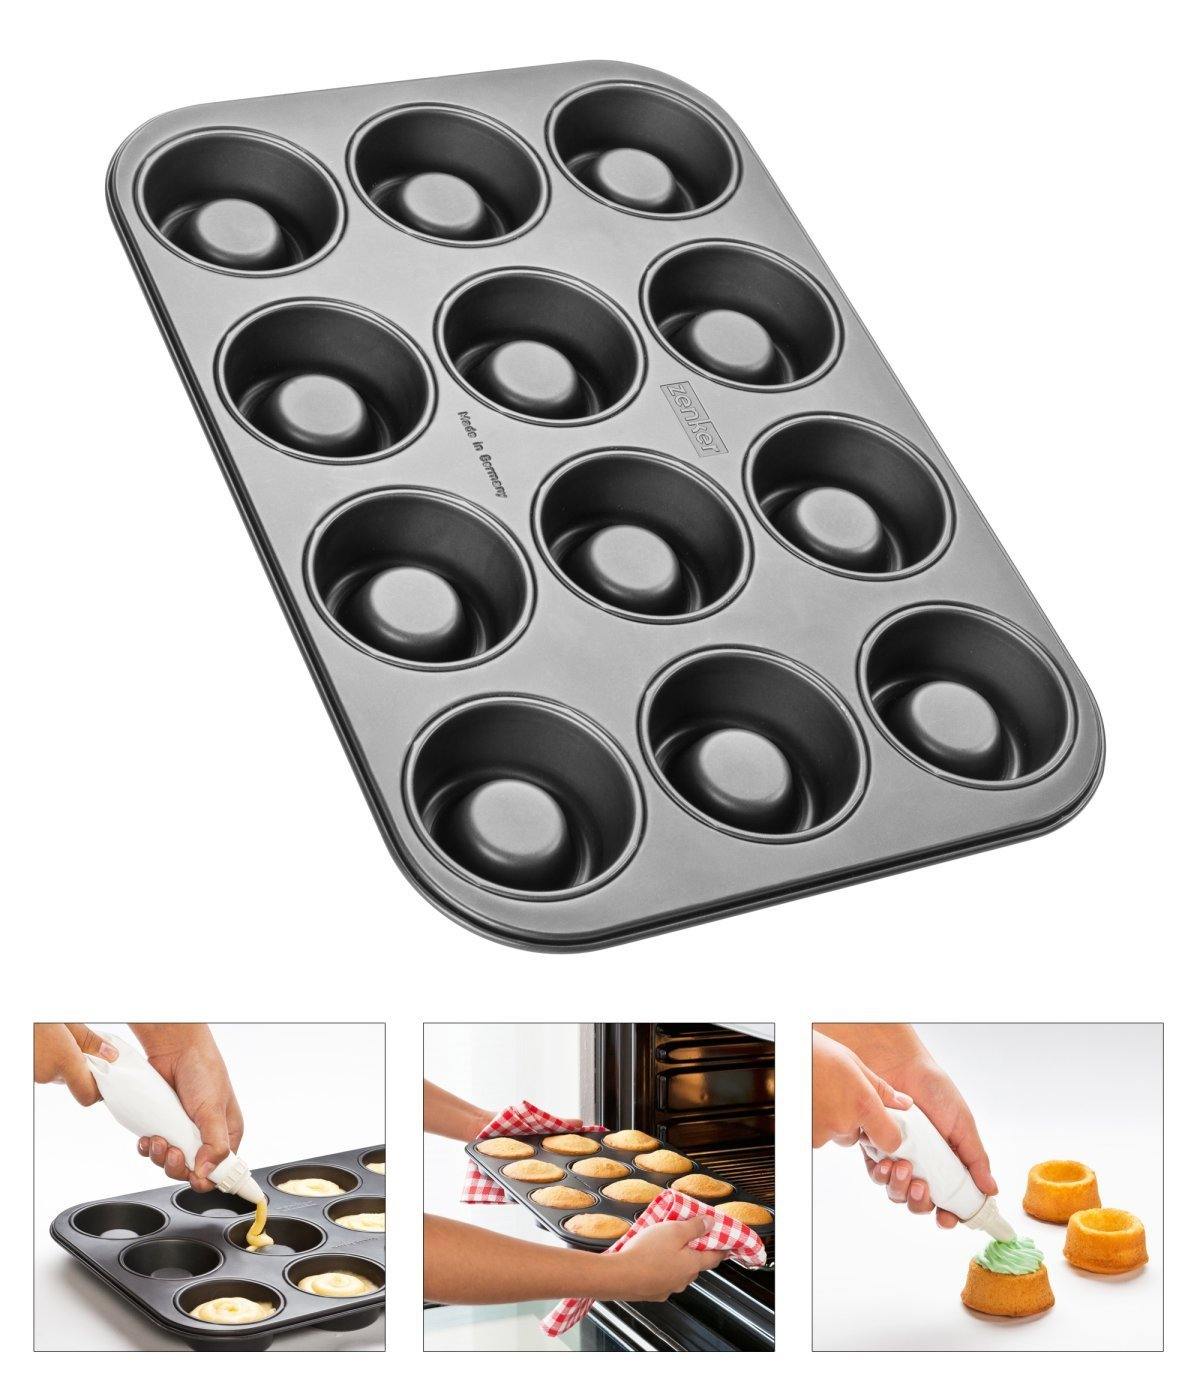 Zenker "Special Creative" Cupcake Baking Tray With 12 Holes, 38X26X3 cm - Whole and All